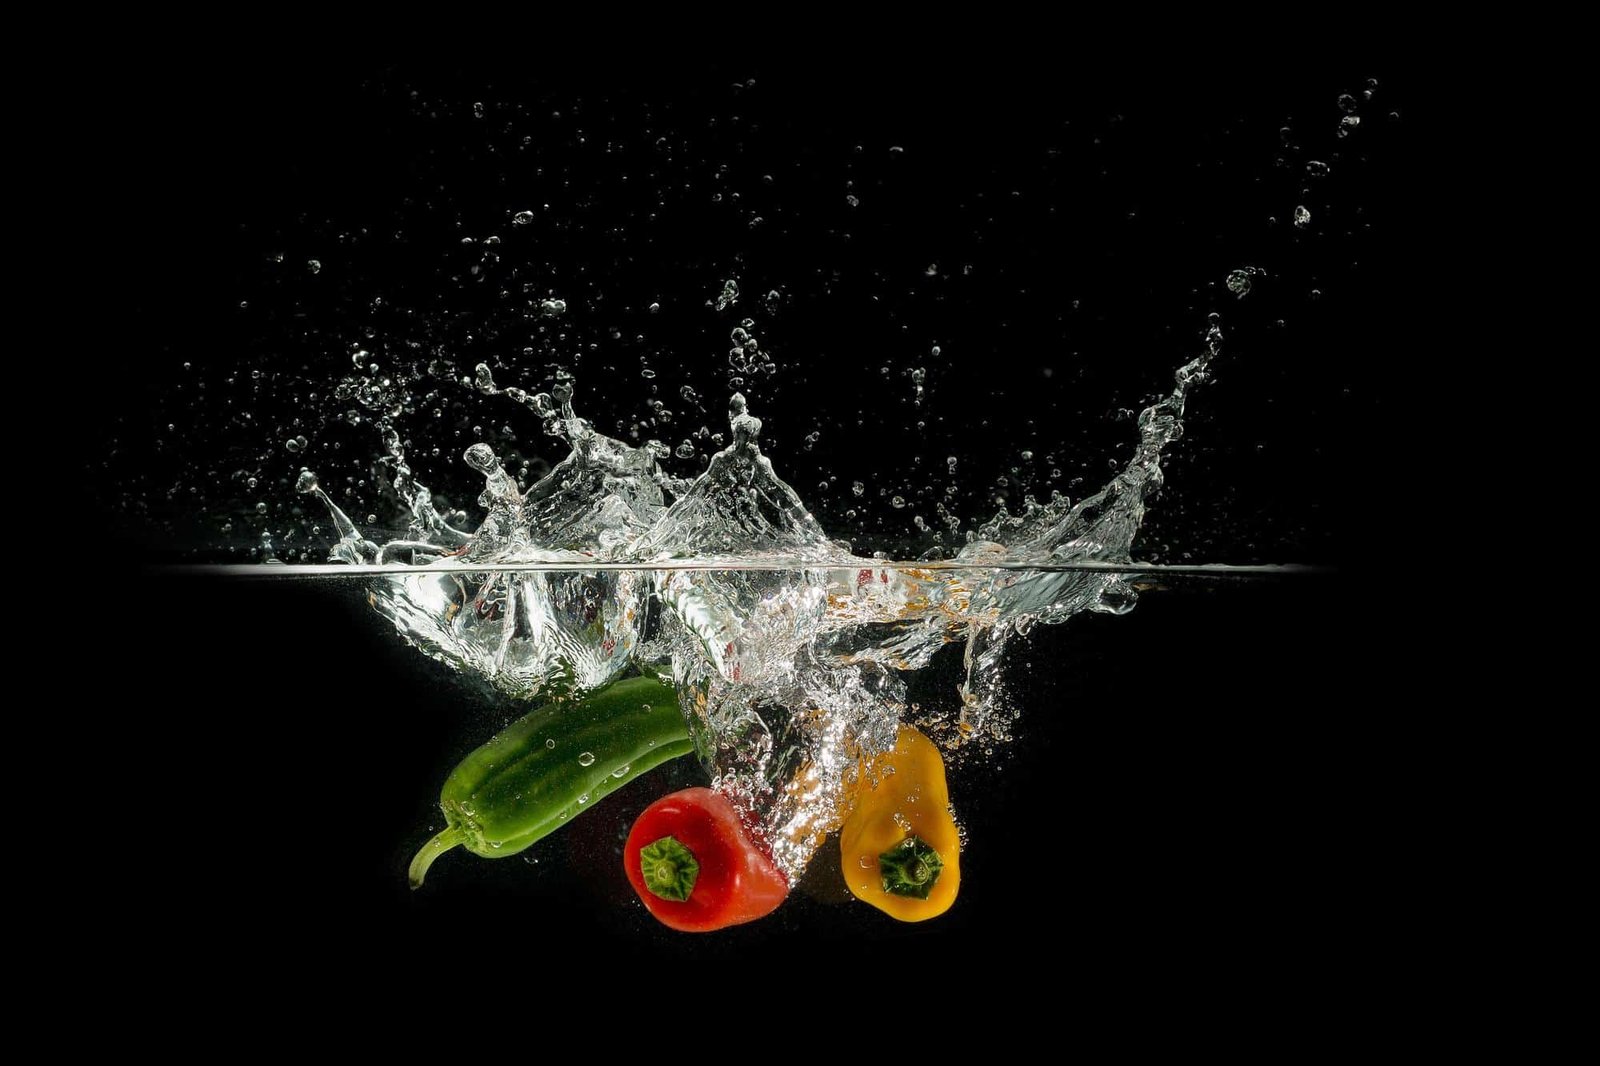 peppers thrown into water causing a splash with a black backdrop